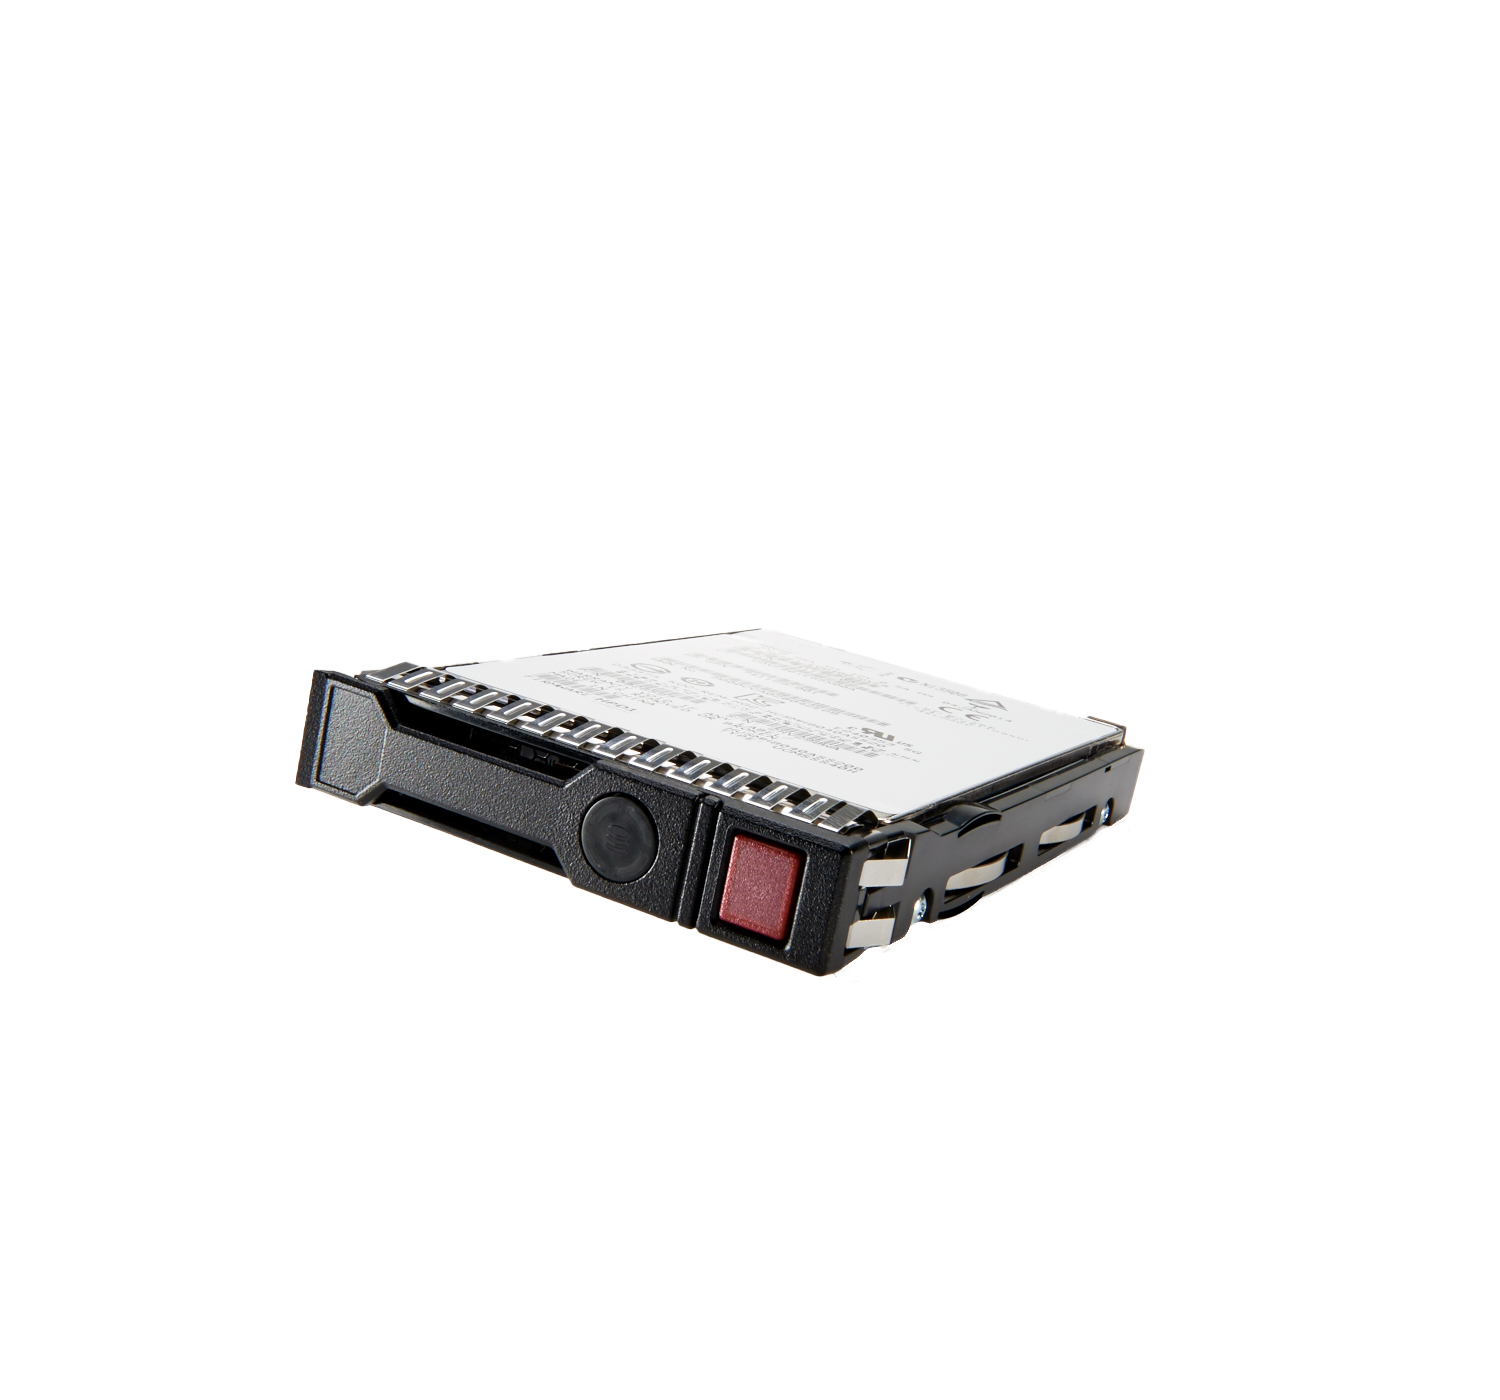 HPE Mixed Use S4620 - SSD - 1.92 TB - Hot-Swap - 2.5" SFF (6.4 cm SFF)